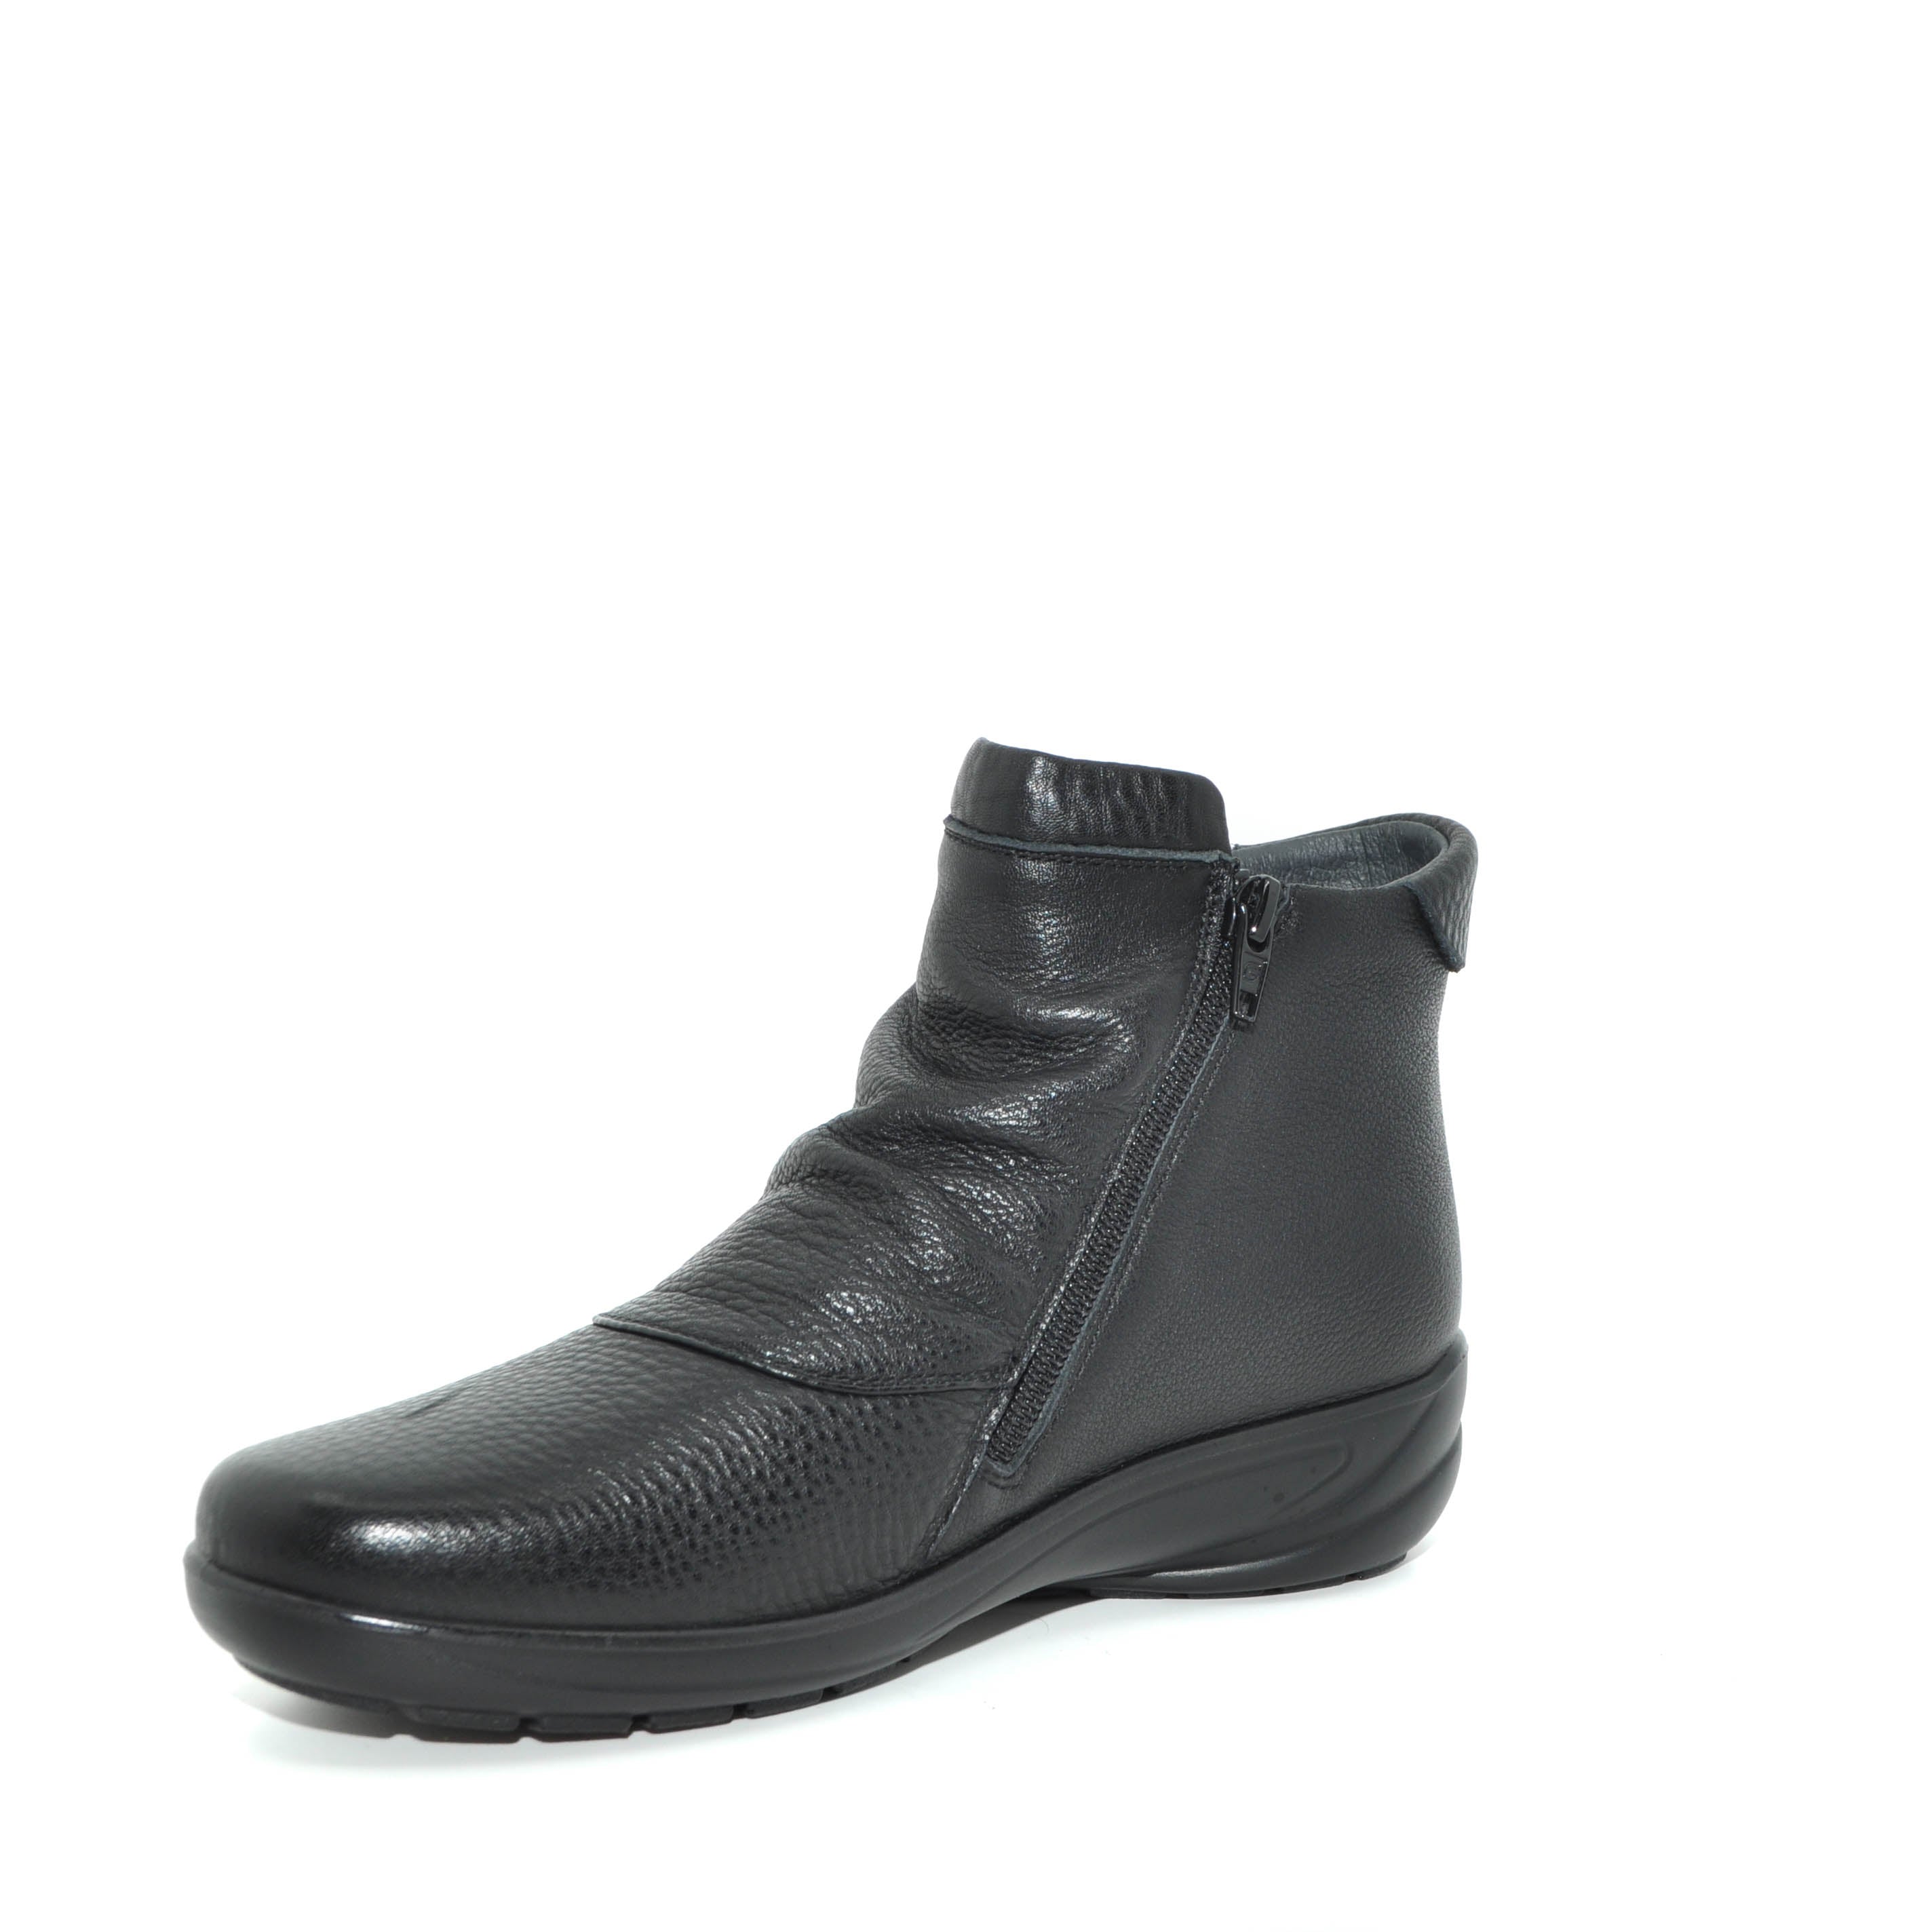 G comfort ladies ankle boots